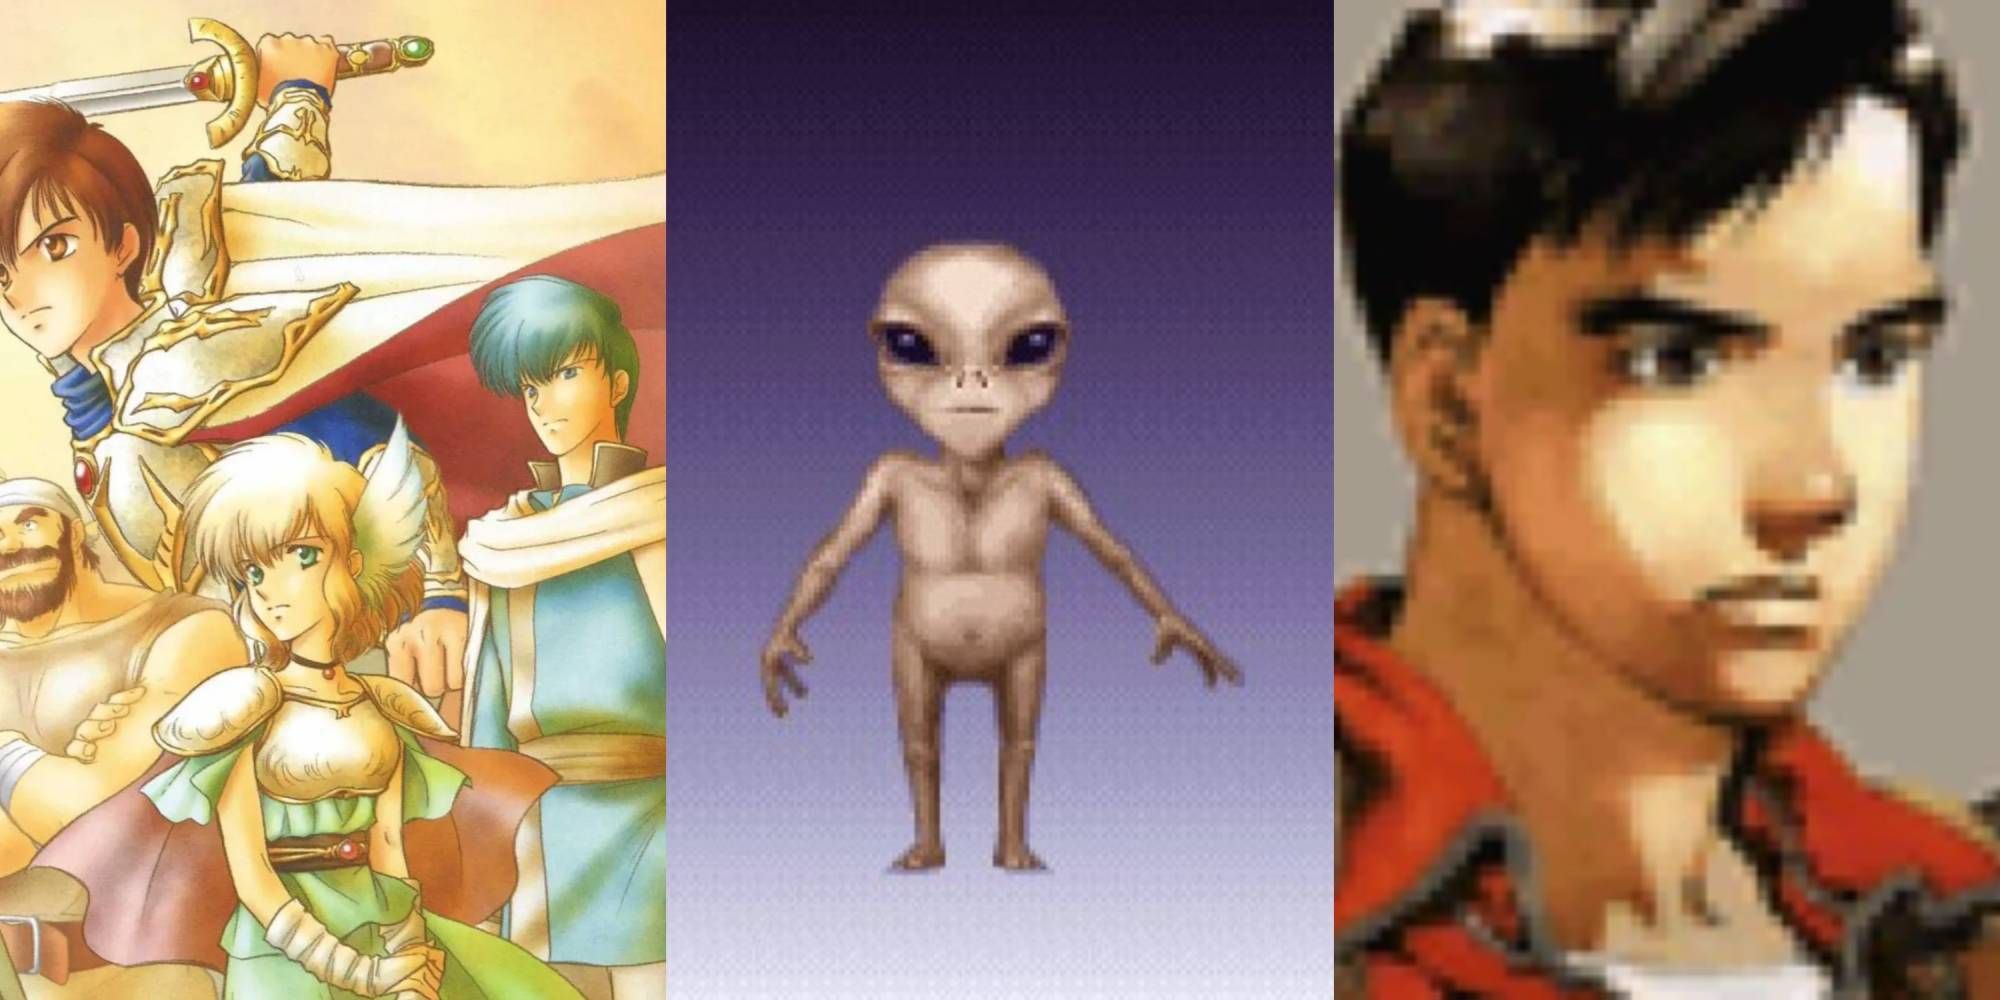 Characters Artwork From Fire Emblem: Thracia 776, Sectoid From X-Com: UFO Defense, and Kazuki From Front Mission 3